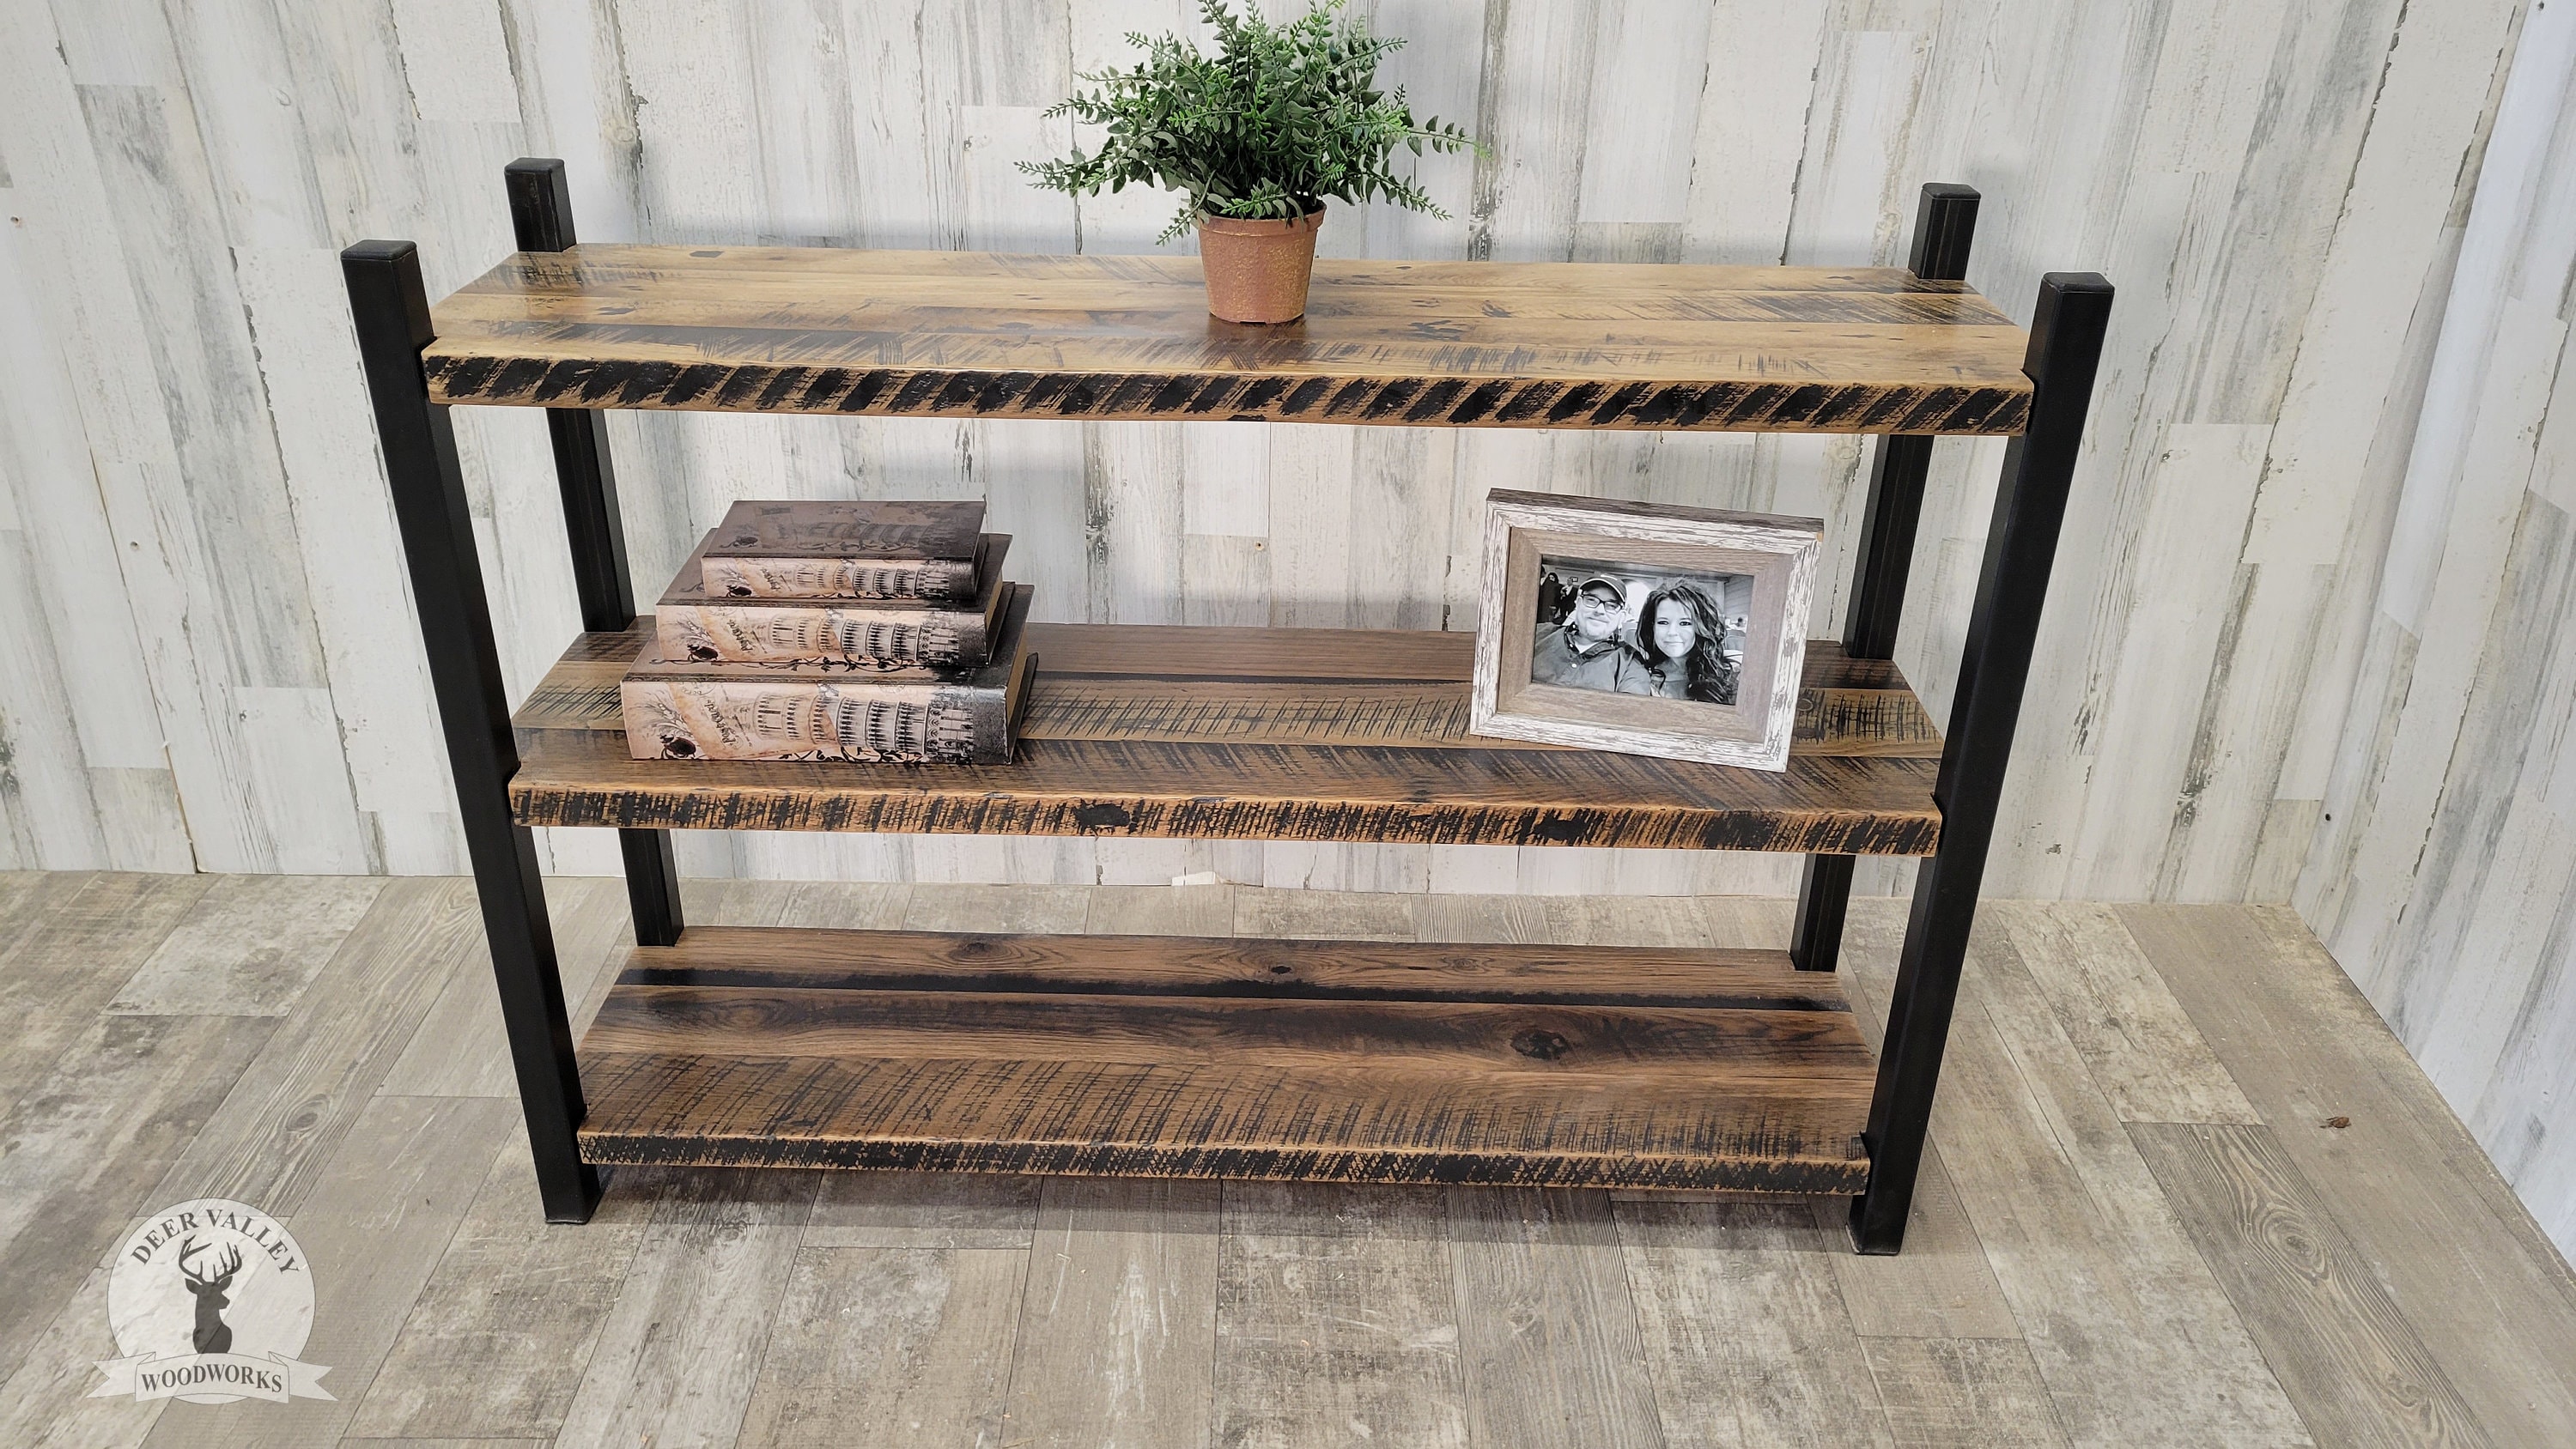 Buy Hand Crafted Reclaimed Wood Shelf, Rustic Shelf, Barnwood Shelves, Free  Standing Shelf, made to order from Deer Valley Woodworks